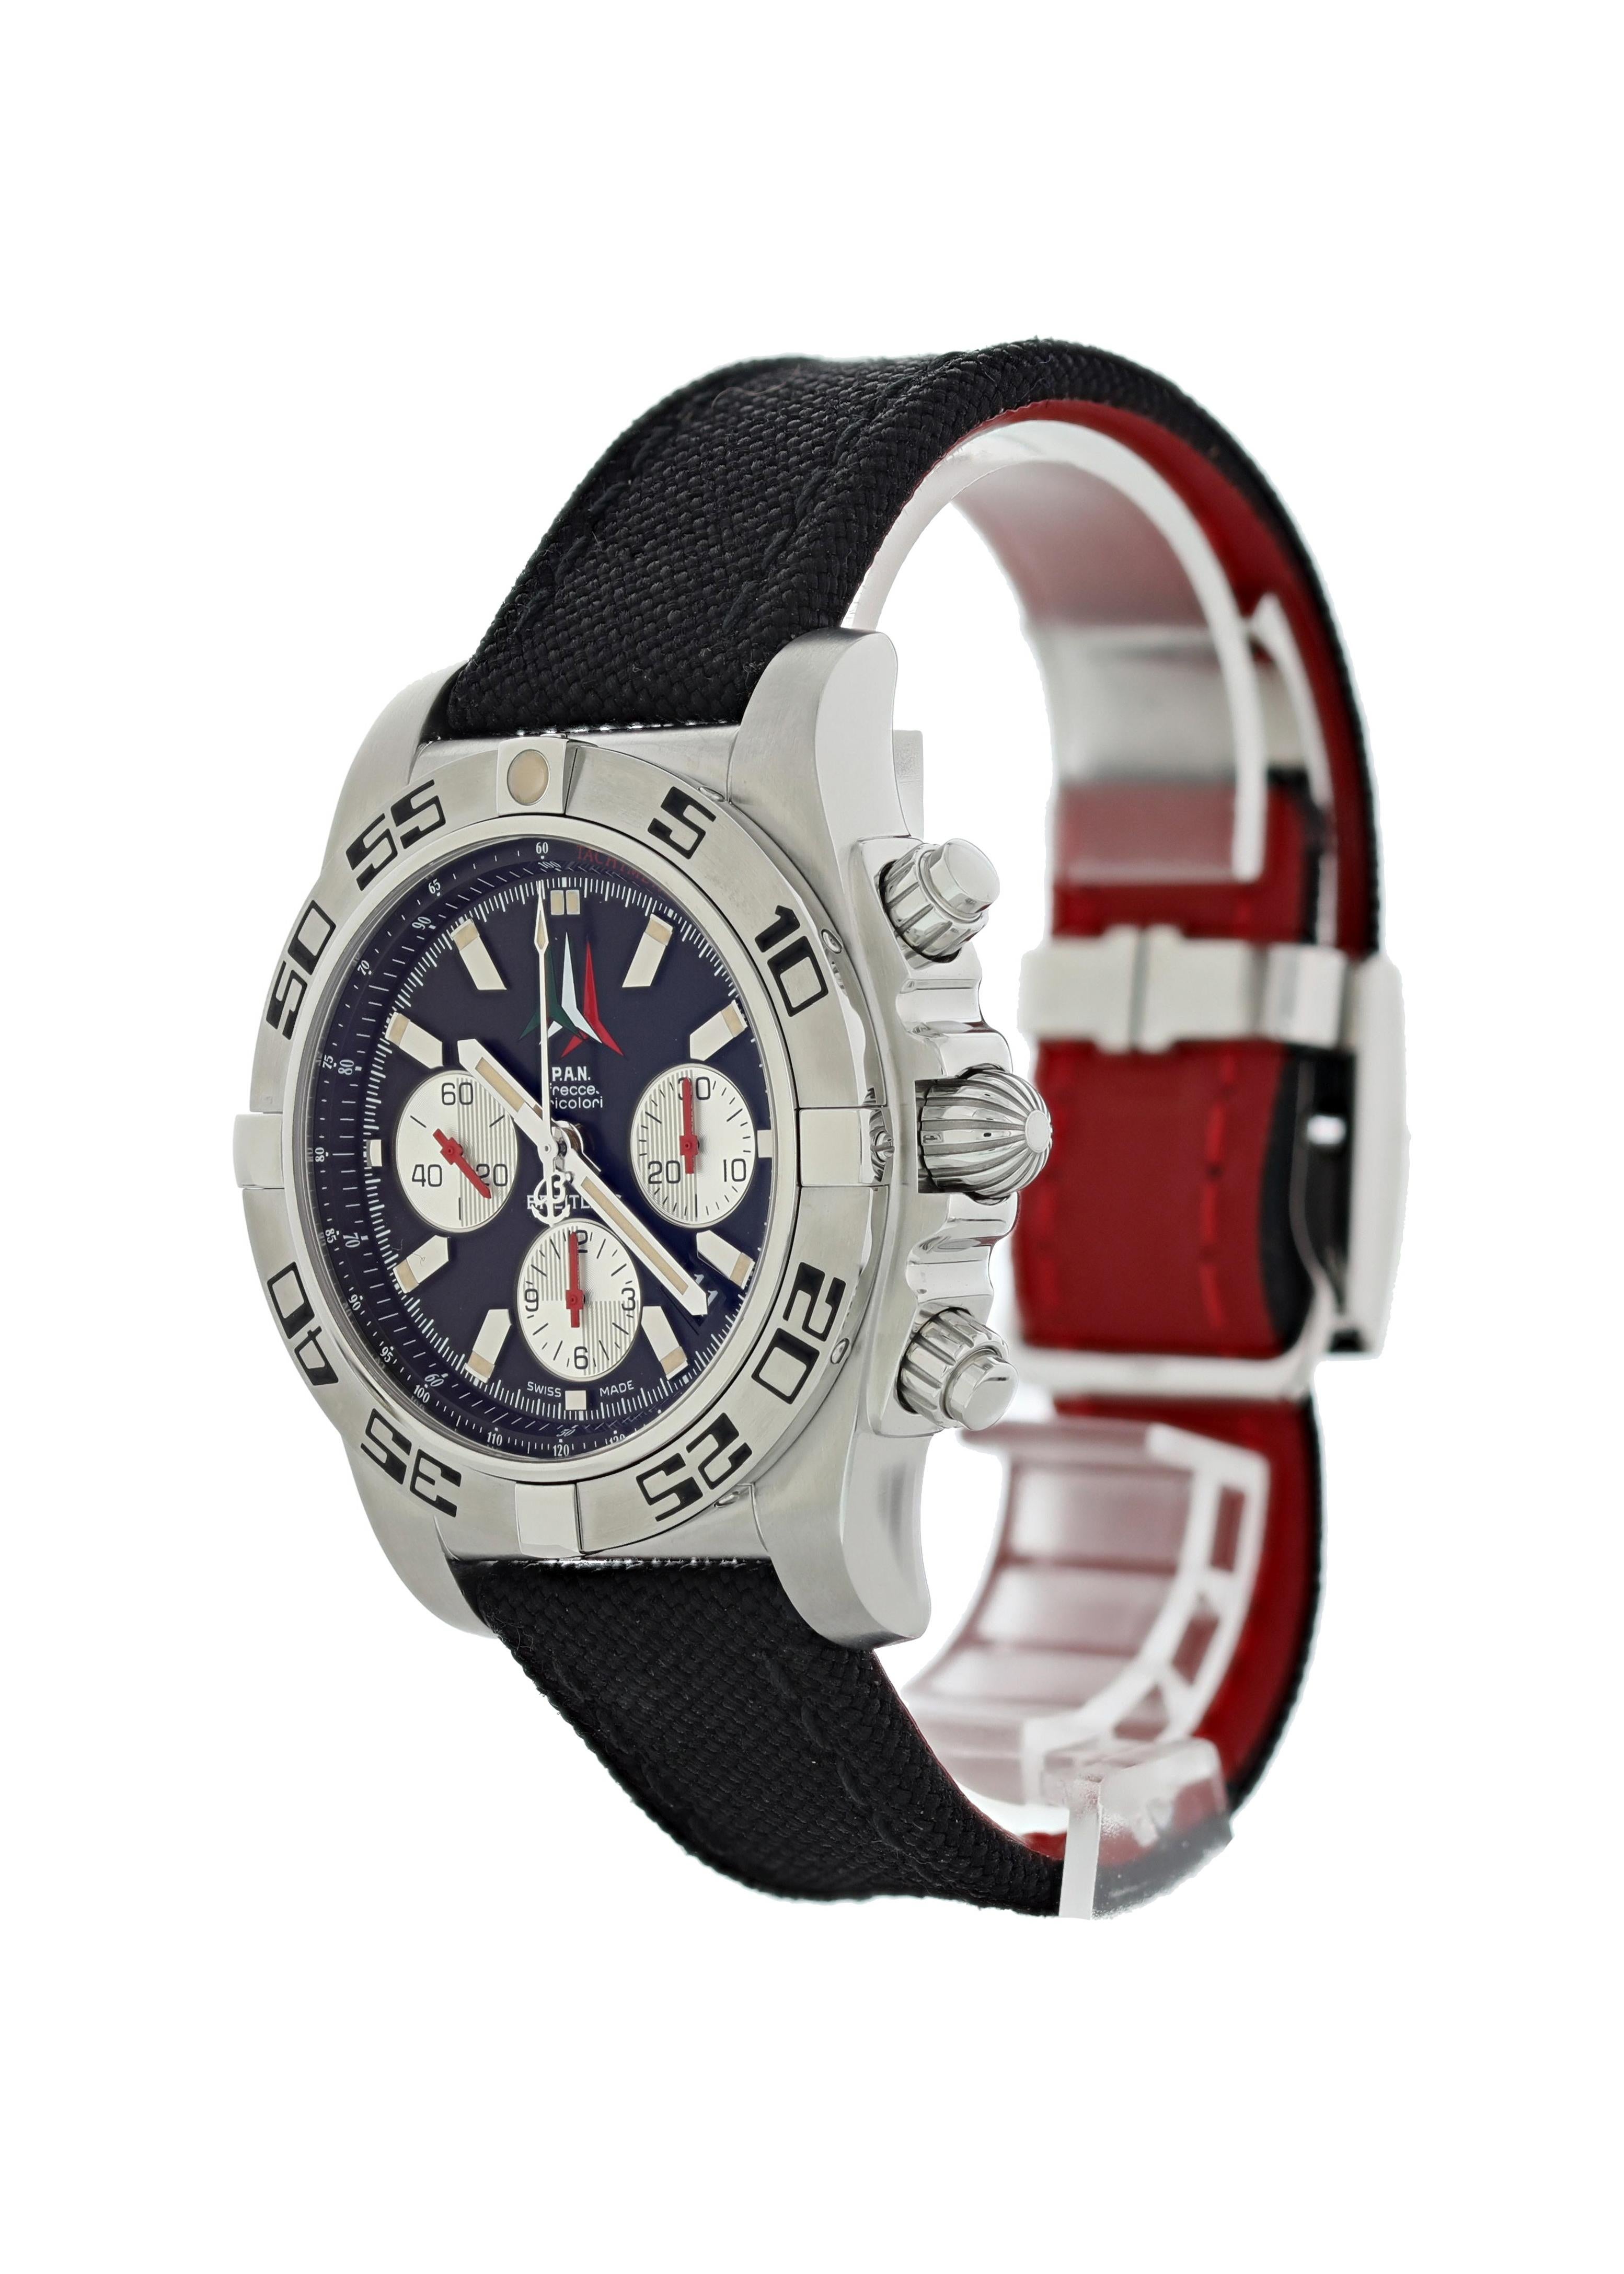 Breitling Chronomat 01 AB0110 P.A.N Frecce Tricolore Mens Watch Box Papers. 44mm Stainless steel case. Stainless steel unidirectional rotating bezel with black numbers. Black dial with Luminous steel hands and hour markers.Three subdials displaying